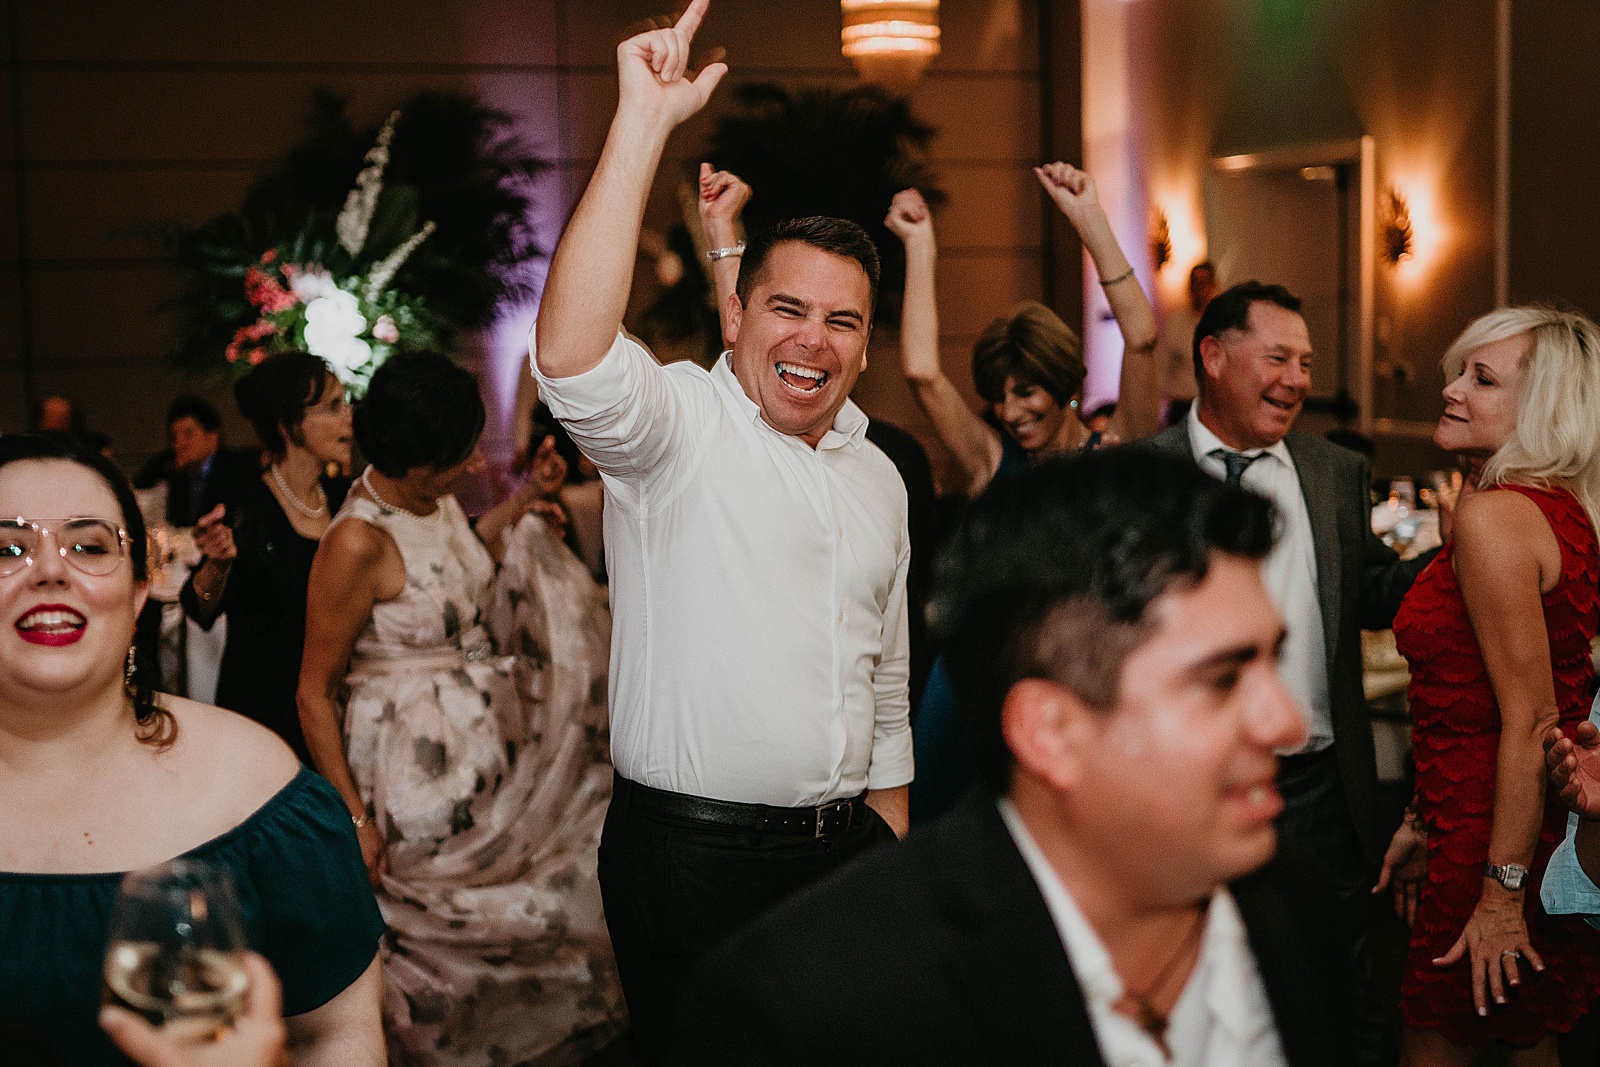 Tropical Pelican Club Wedding Captured by South Florida Wedding Photographer, Krystal Capone Photography.